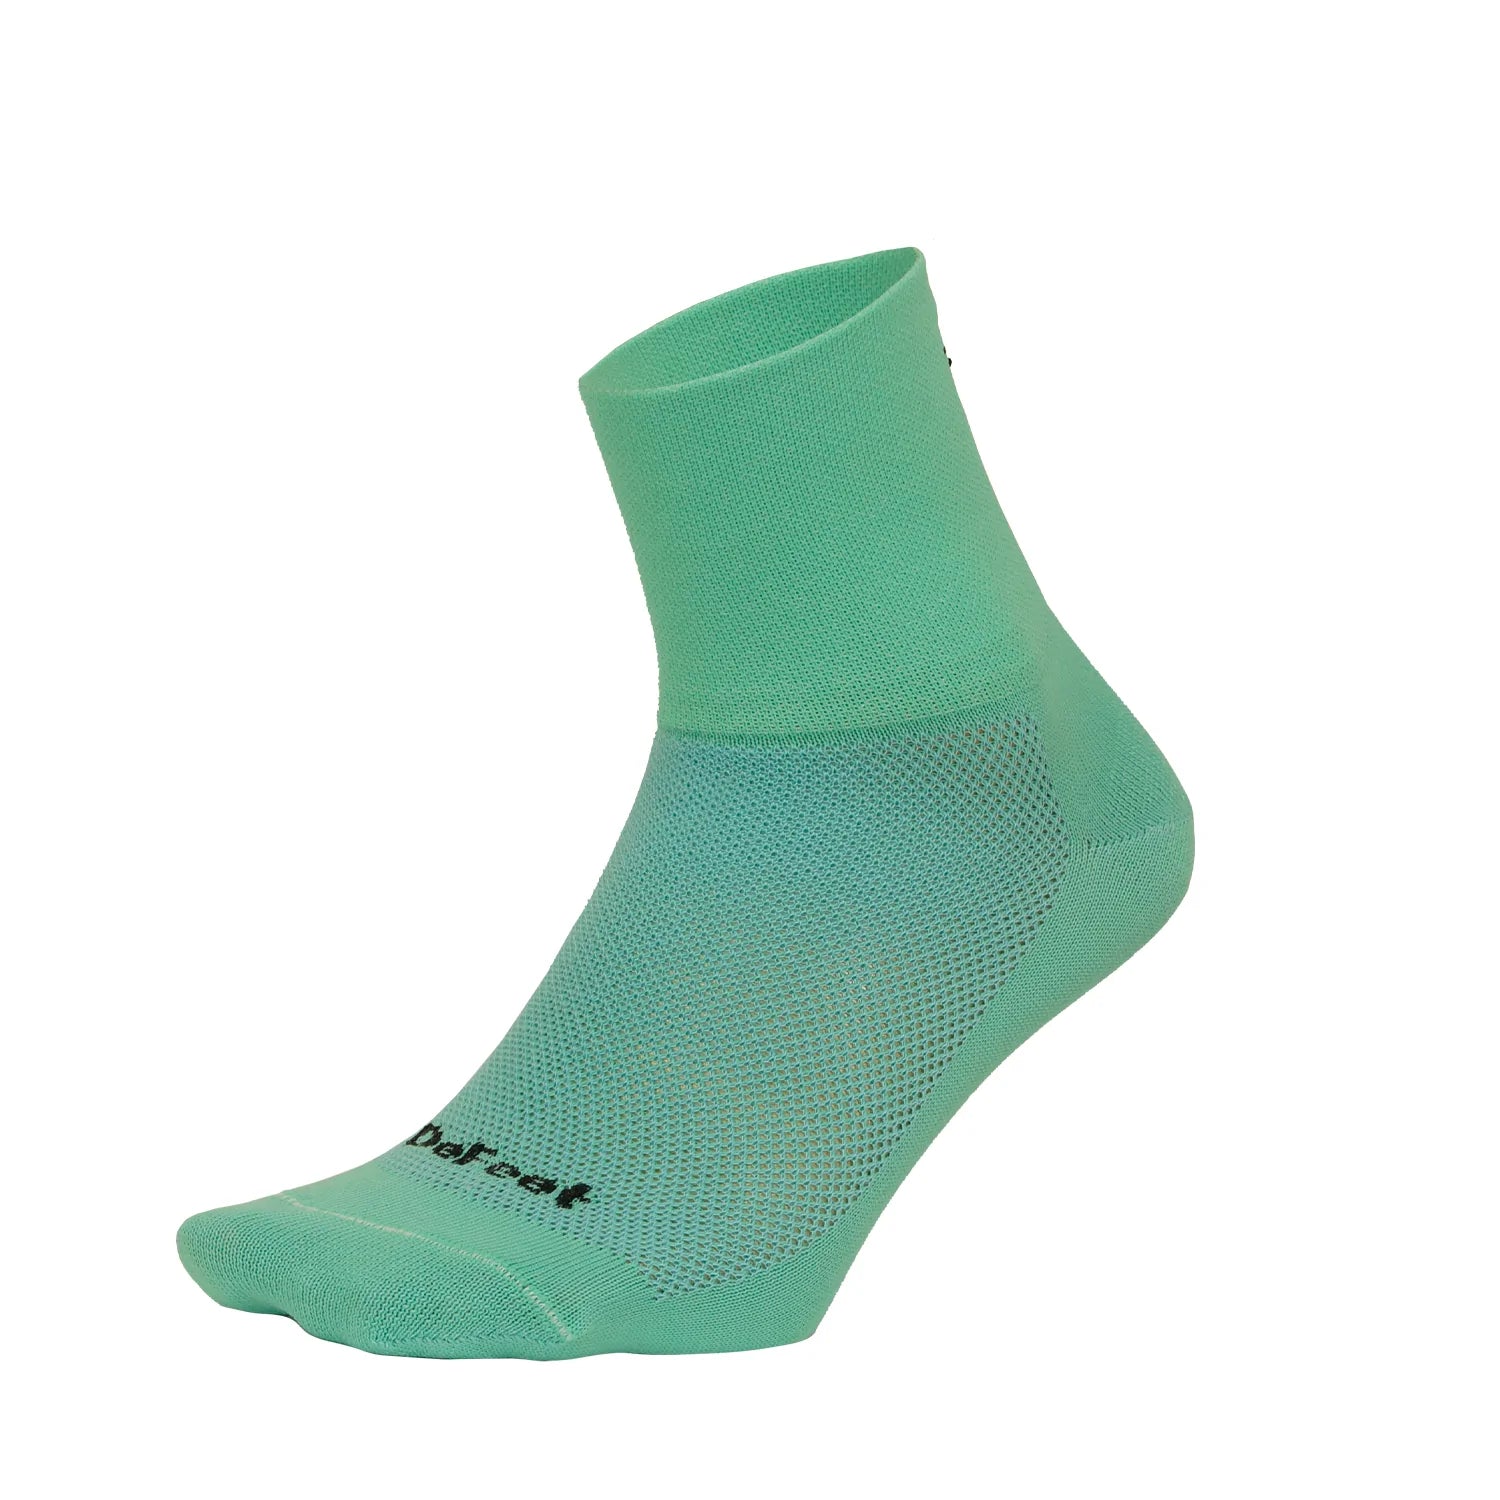 Aireator 3" cuff cycling sock in green with small black d-logo on back of cuff